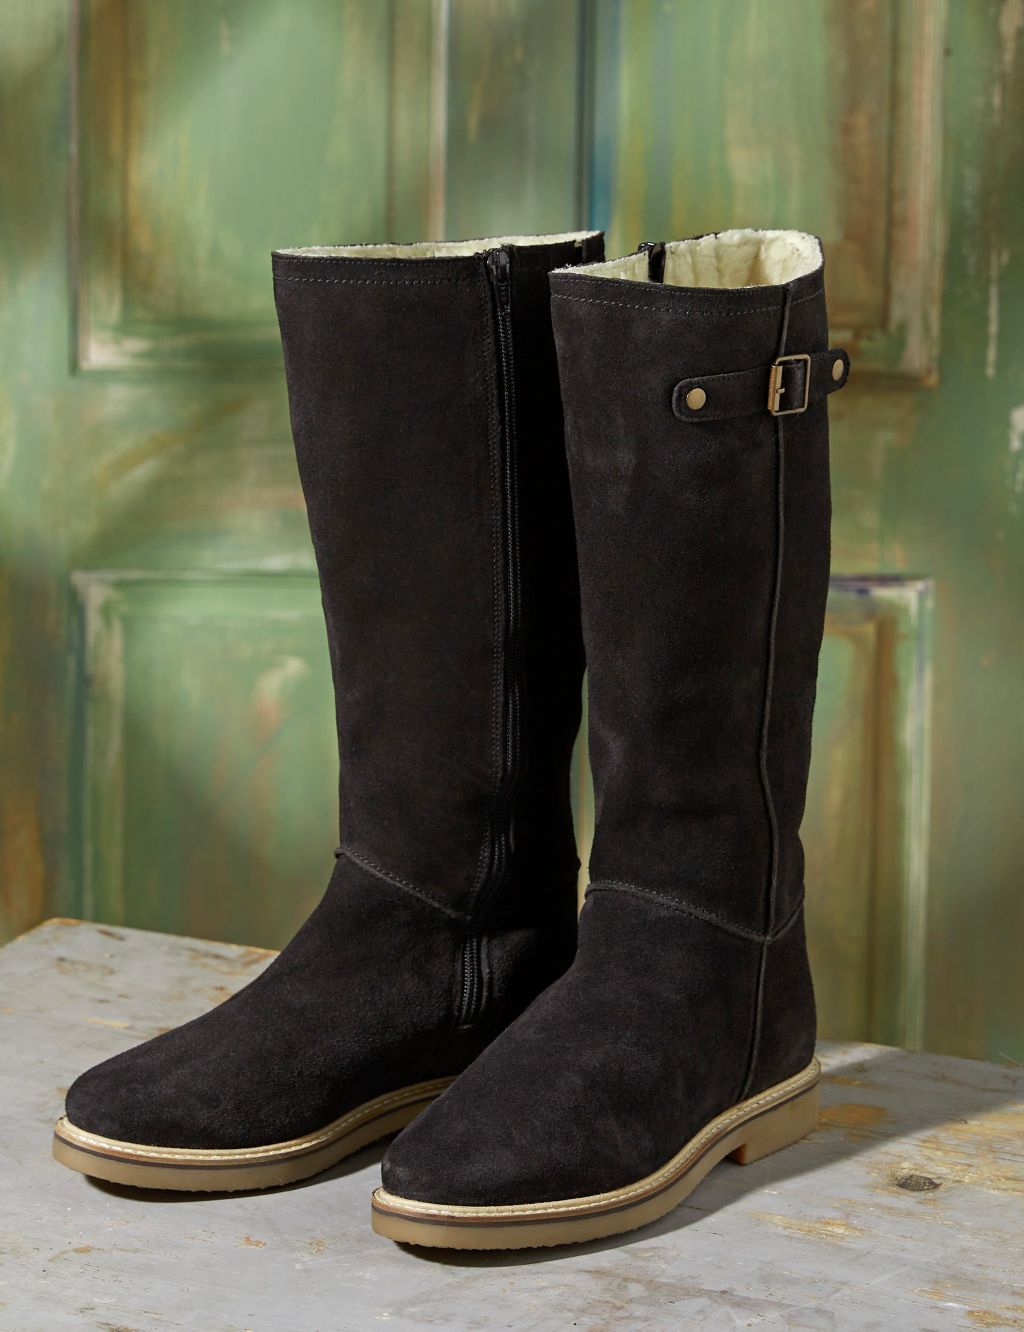 Suede Buckle Knee High Boots image 4